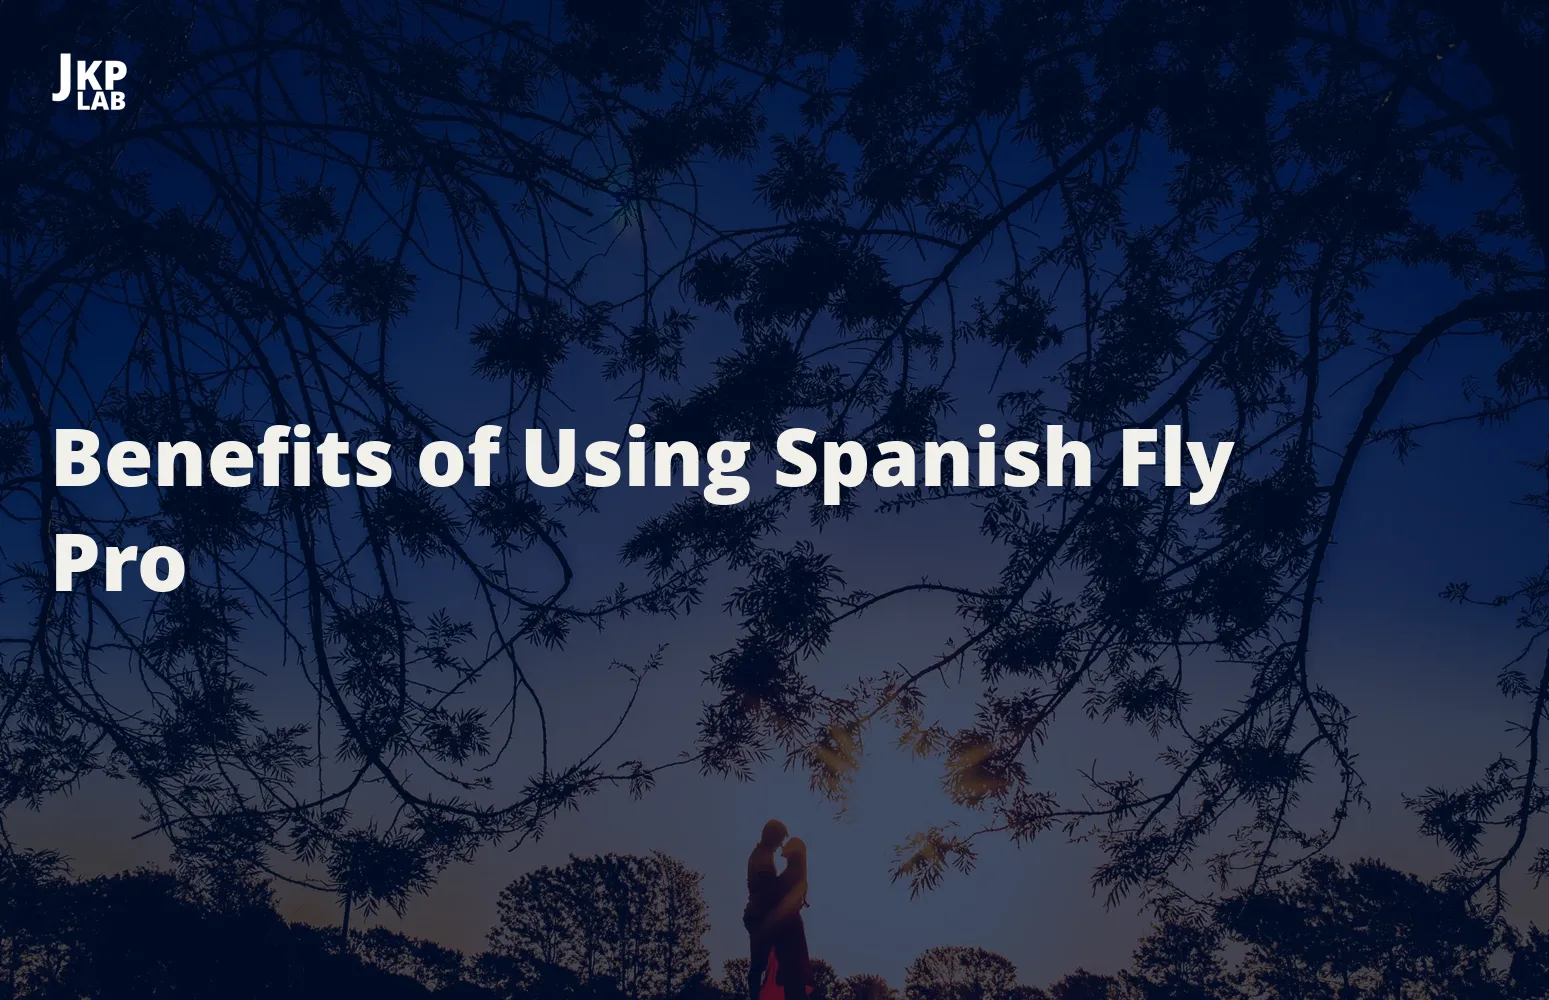 Spanish Fly and Beetles: The Connection